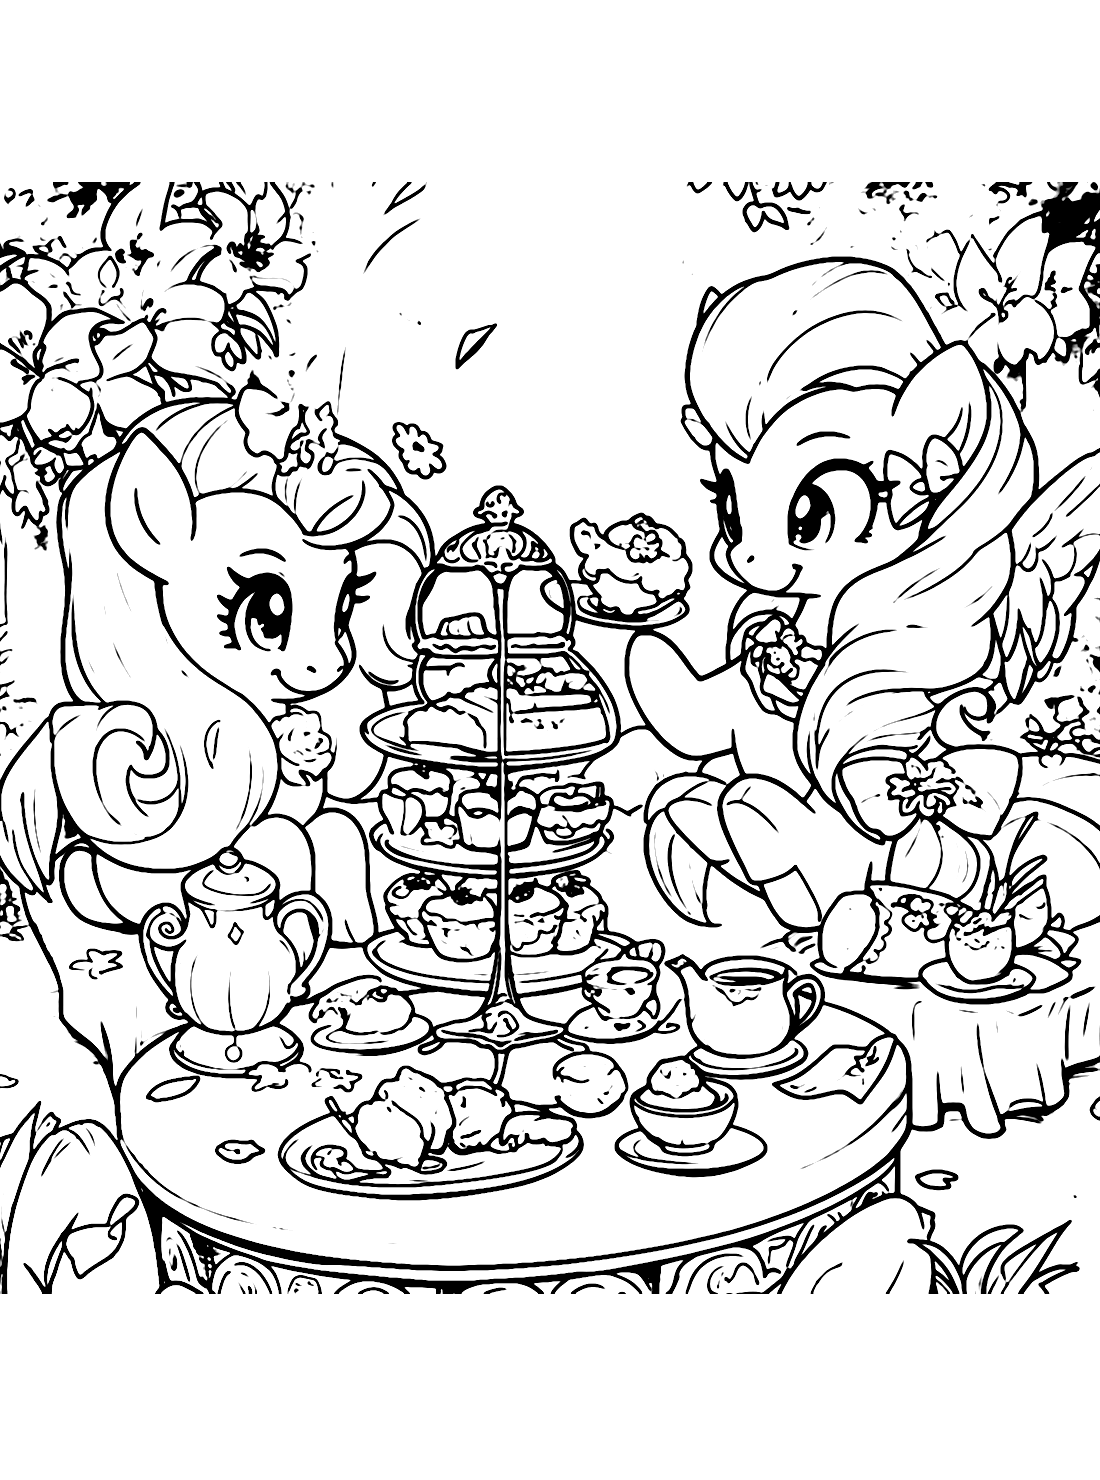 Applejack Fluttershy My Little Pony Coloring Pages